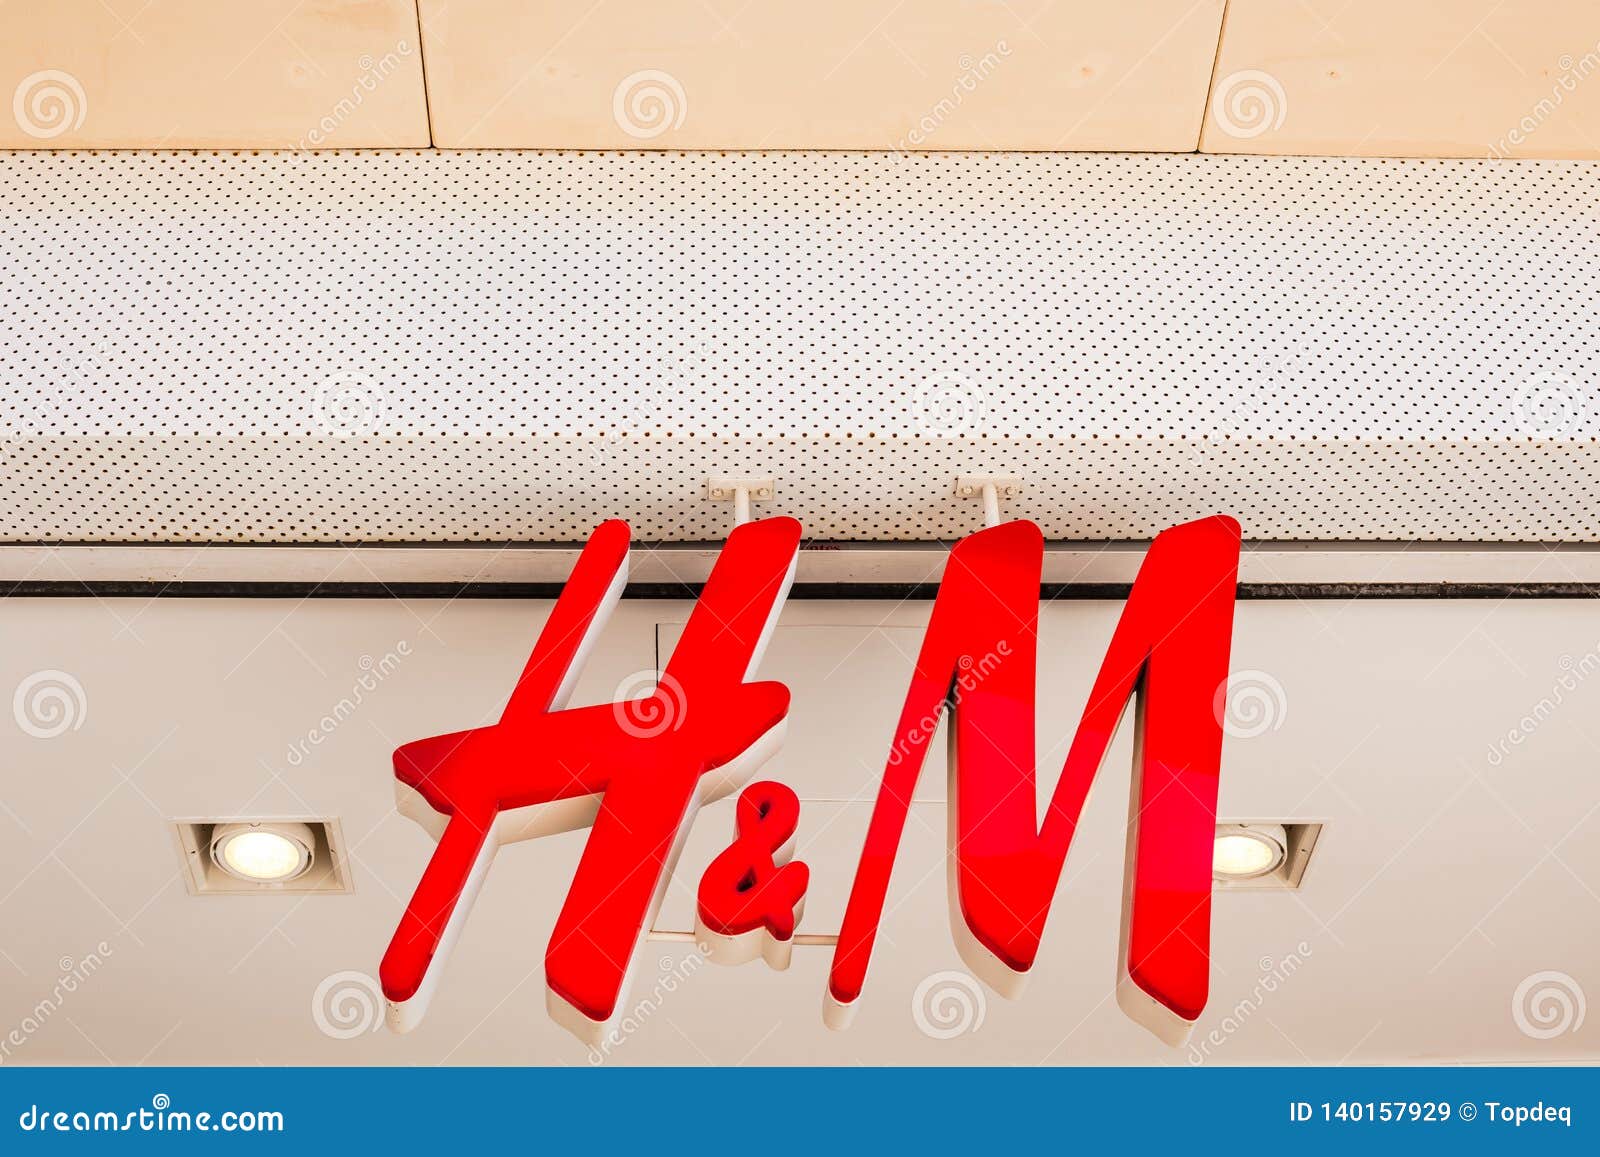 H&M Brand Logo : H M 1 Download H M 1 Vector Logos Brand Logo Company Logo - In 1999 h&m needed to update the original logotype from in 1968.